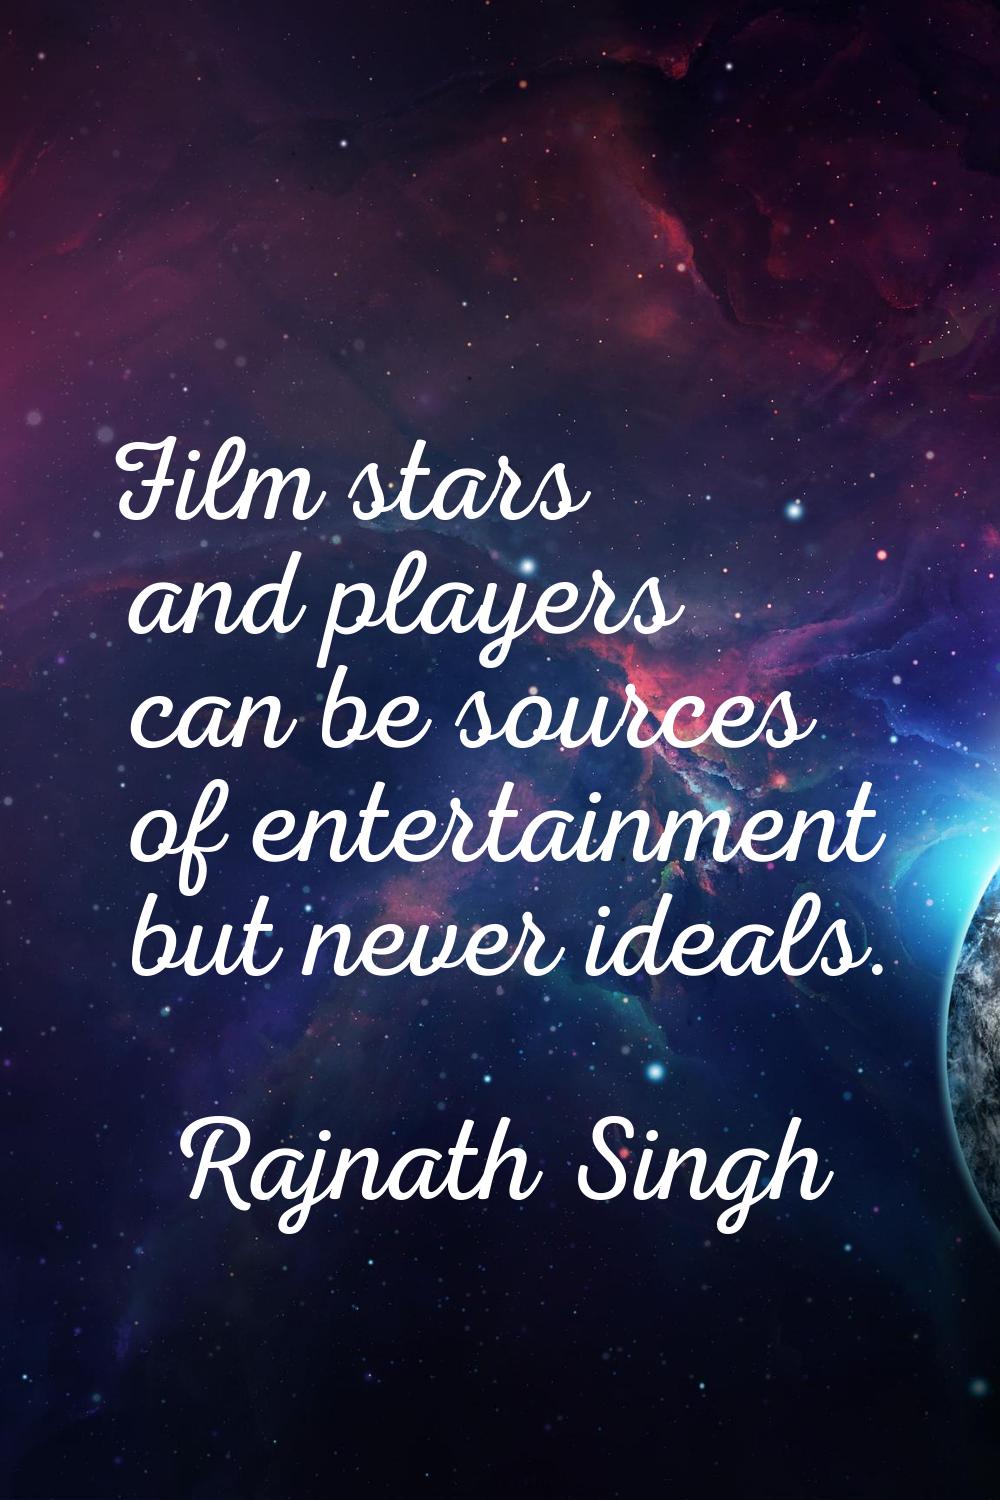 Film stars and players can be sources of entertainment but never ideals.